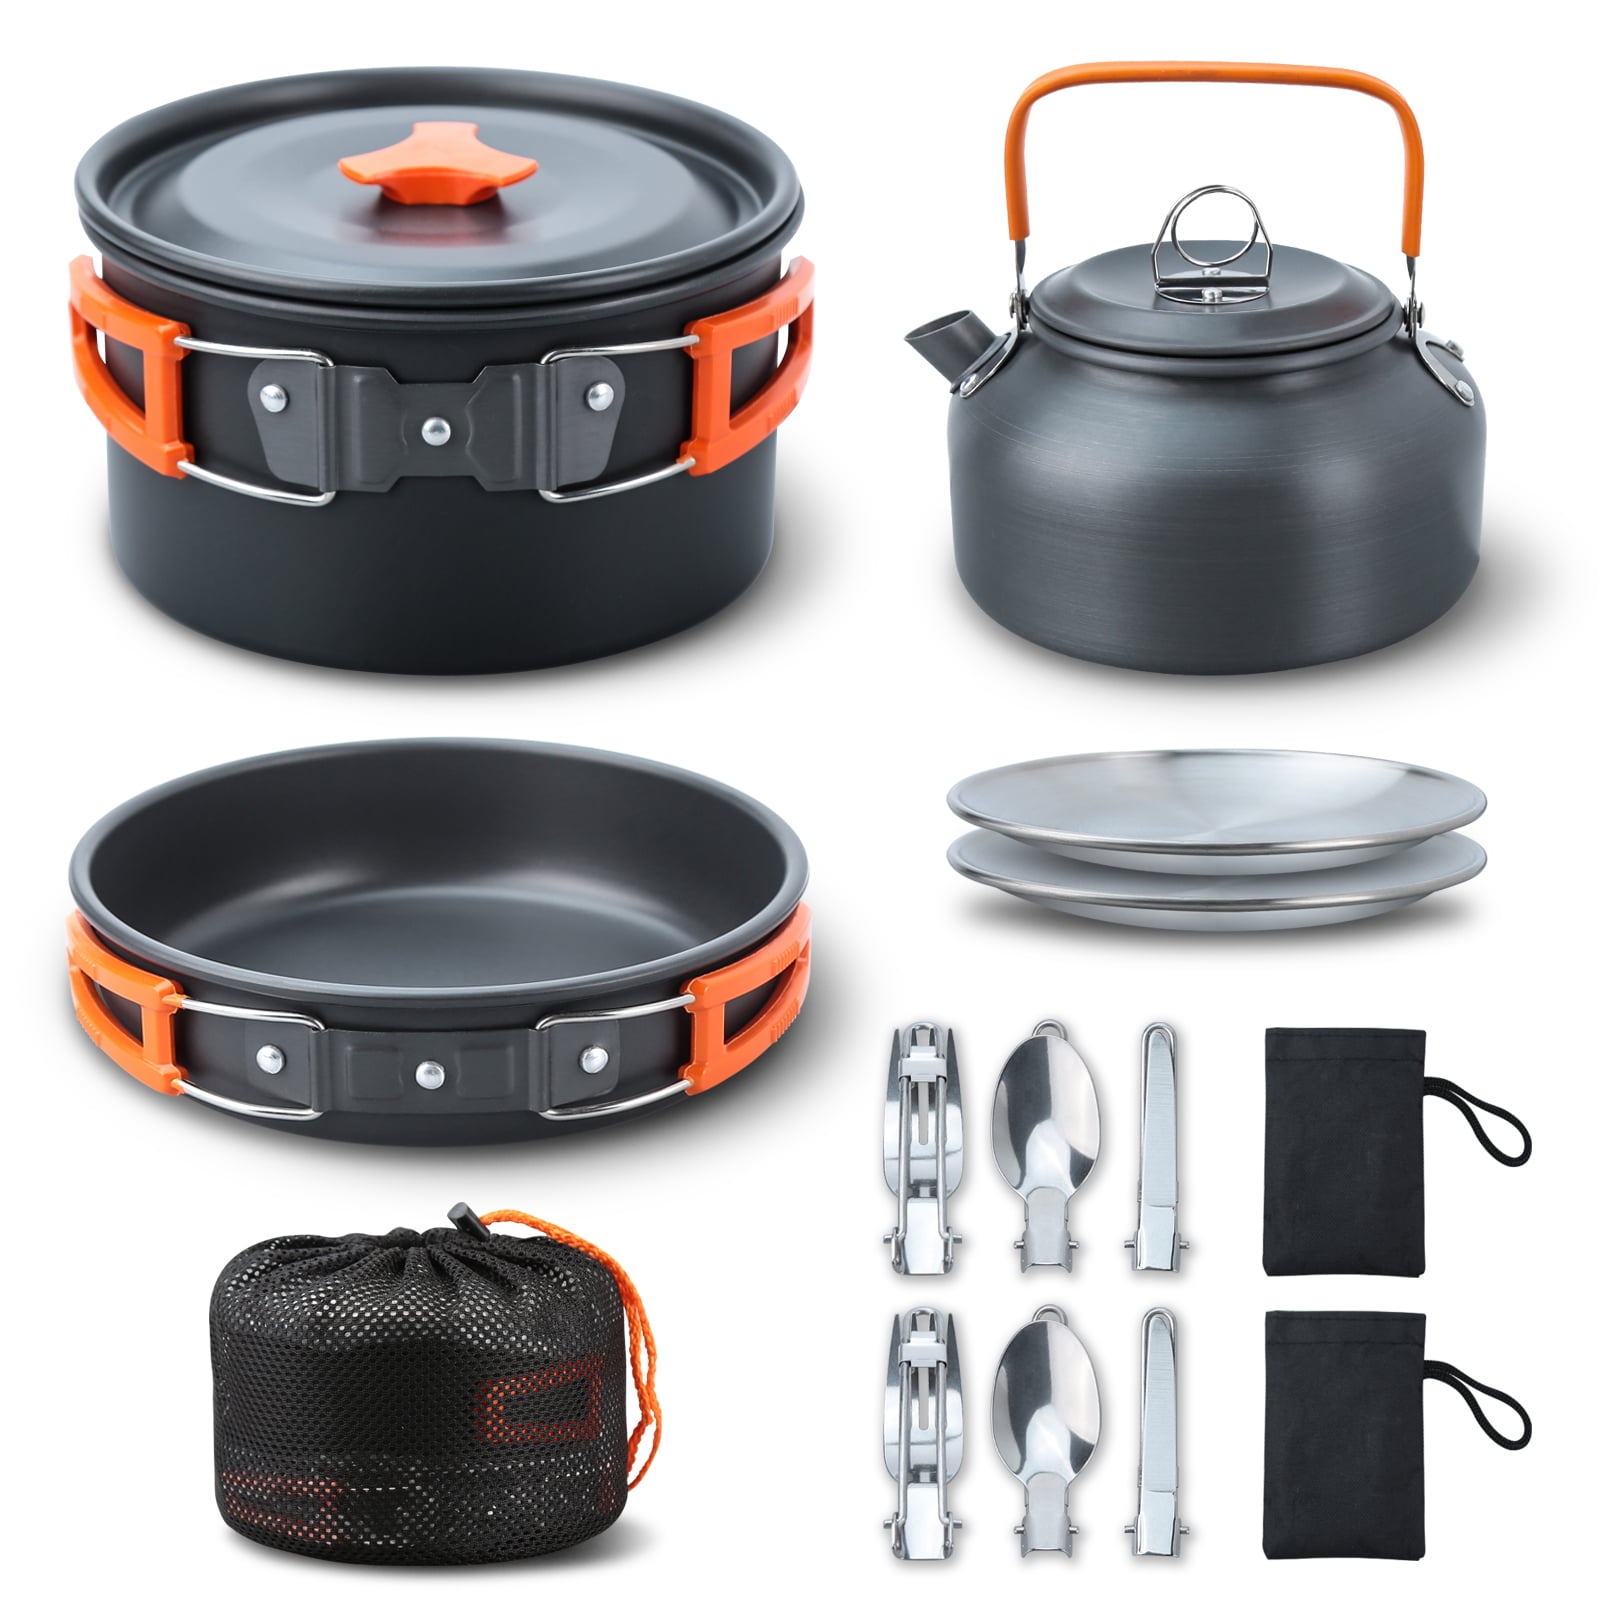 Best Camping Cookware Sets 2021: Pots and Pans for Campsite Cooking